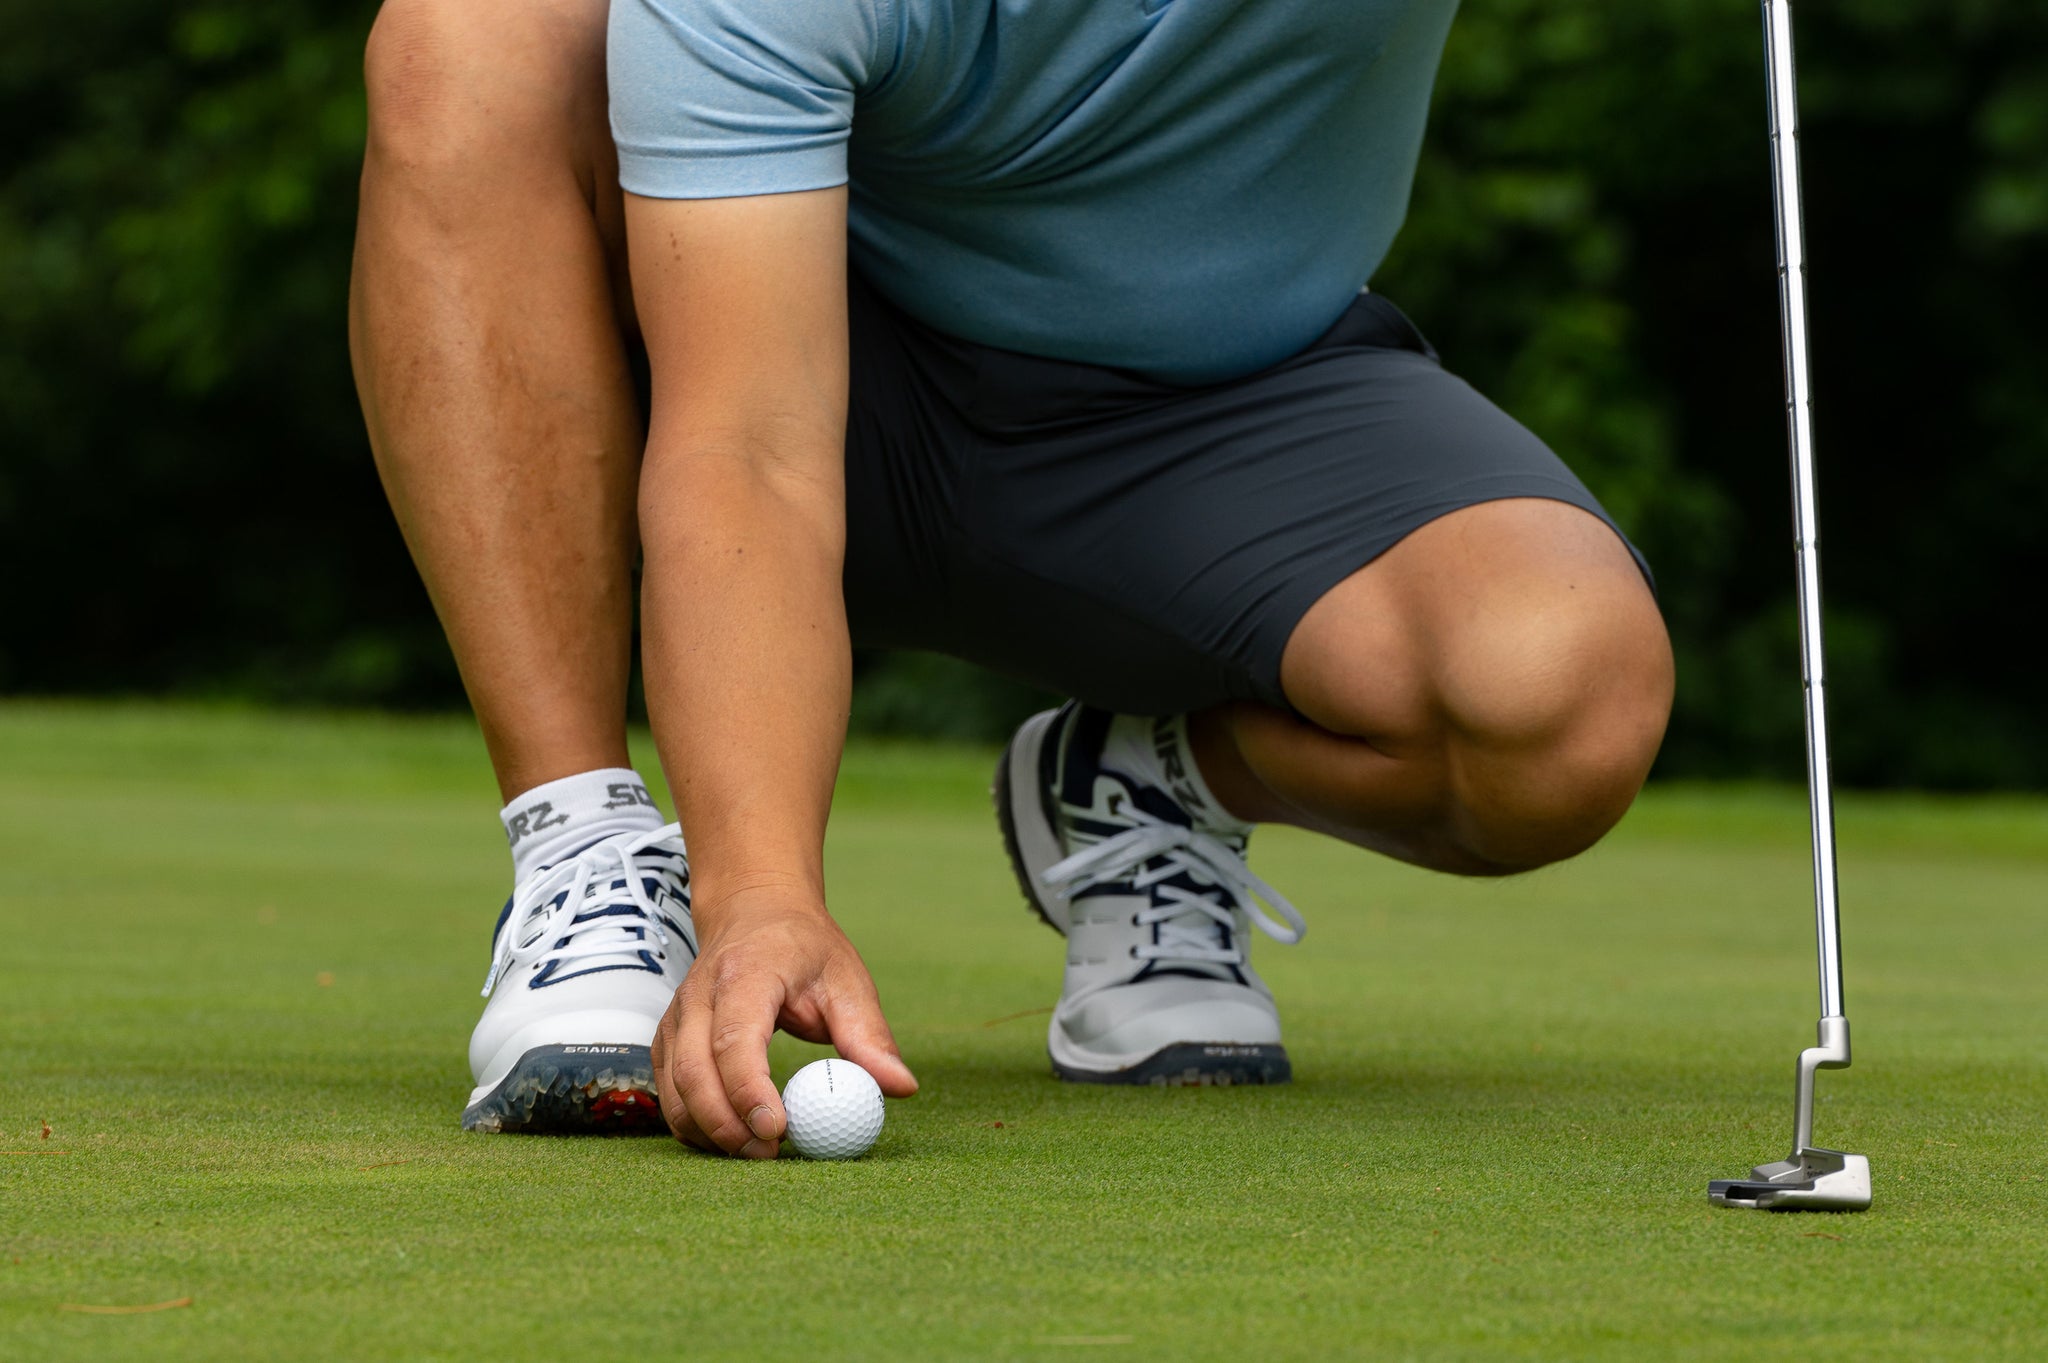 The Crucial Role of Stability in Mastering the Short Game